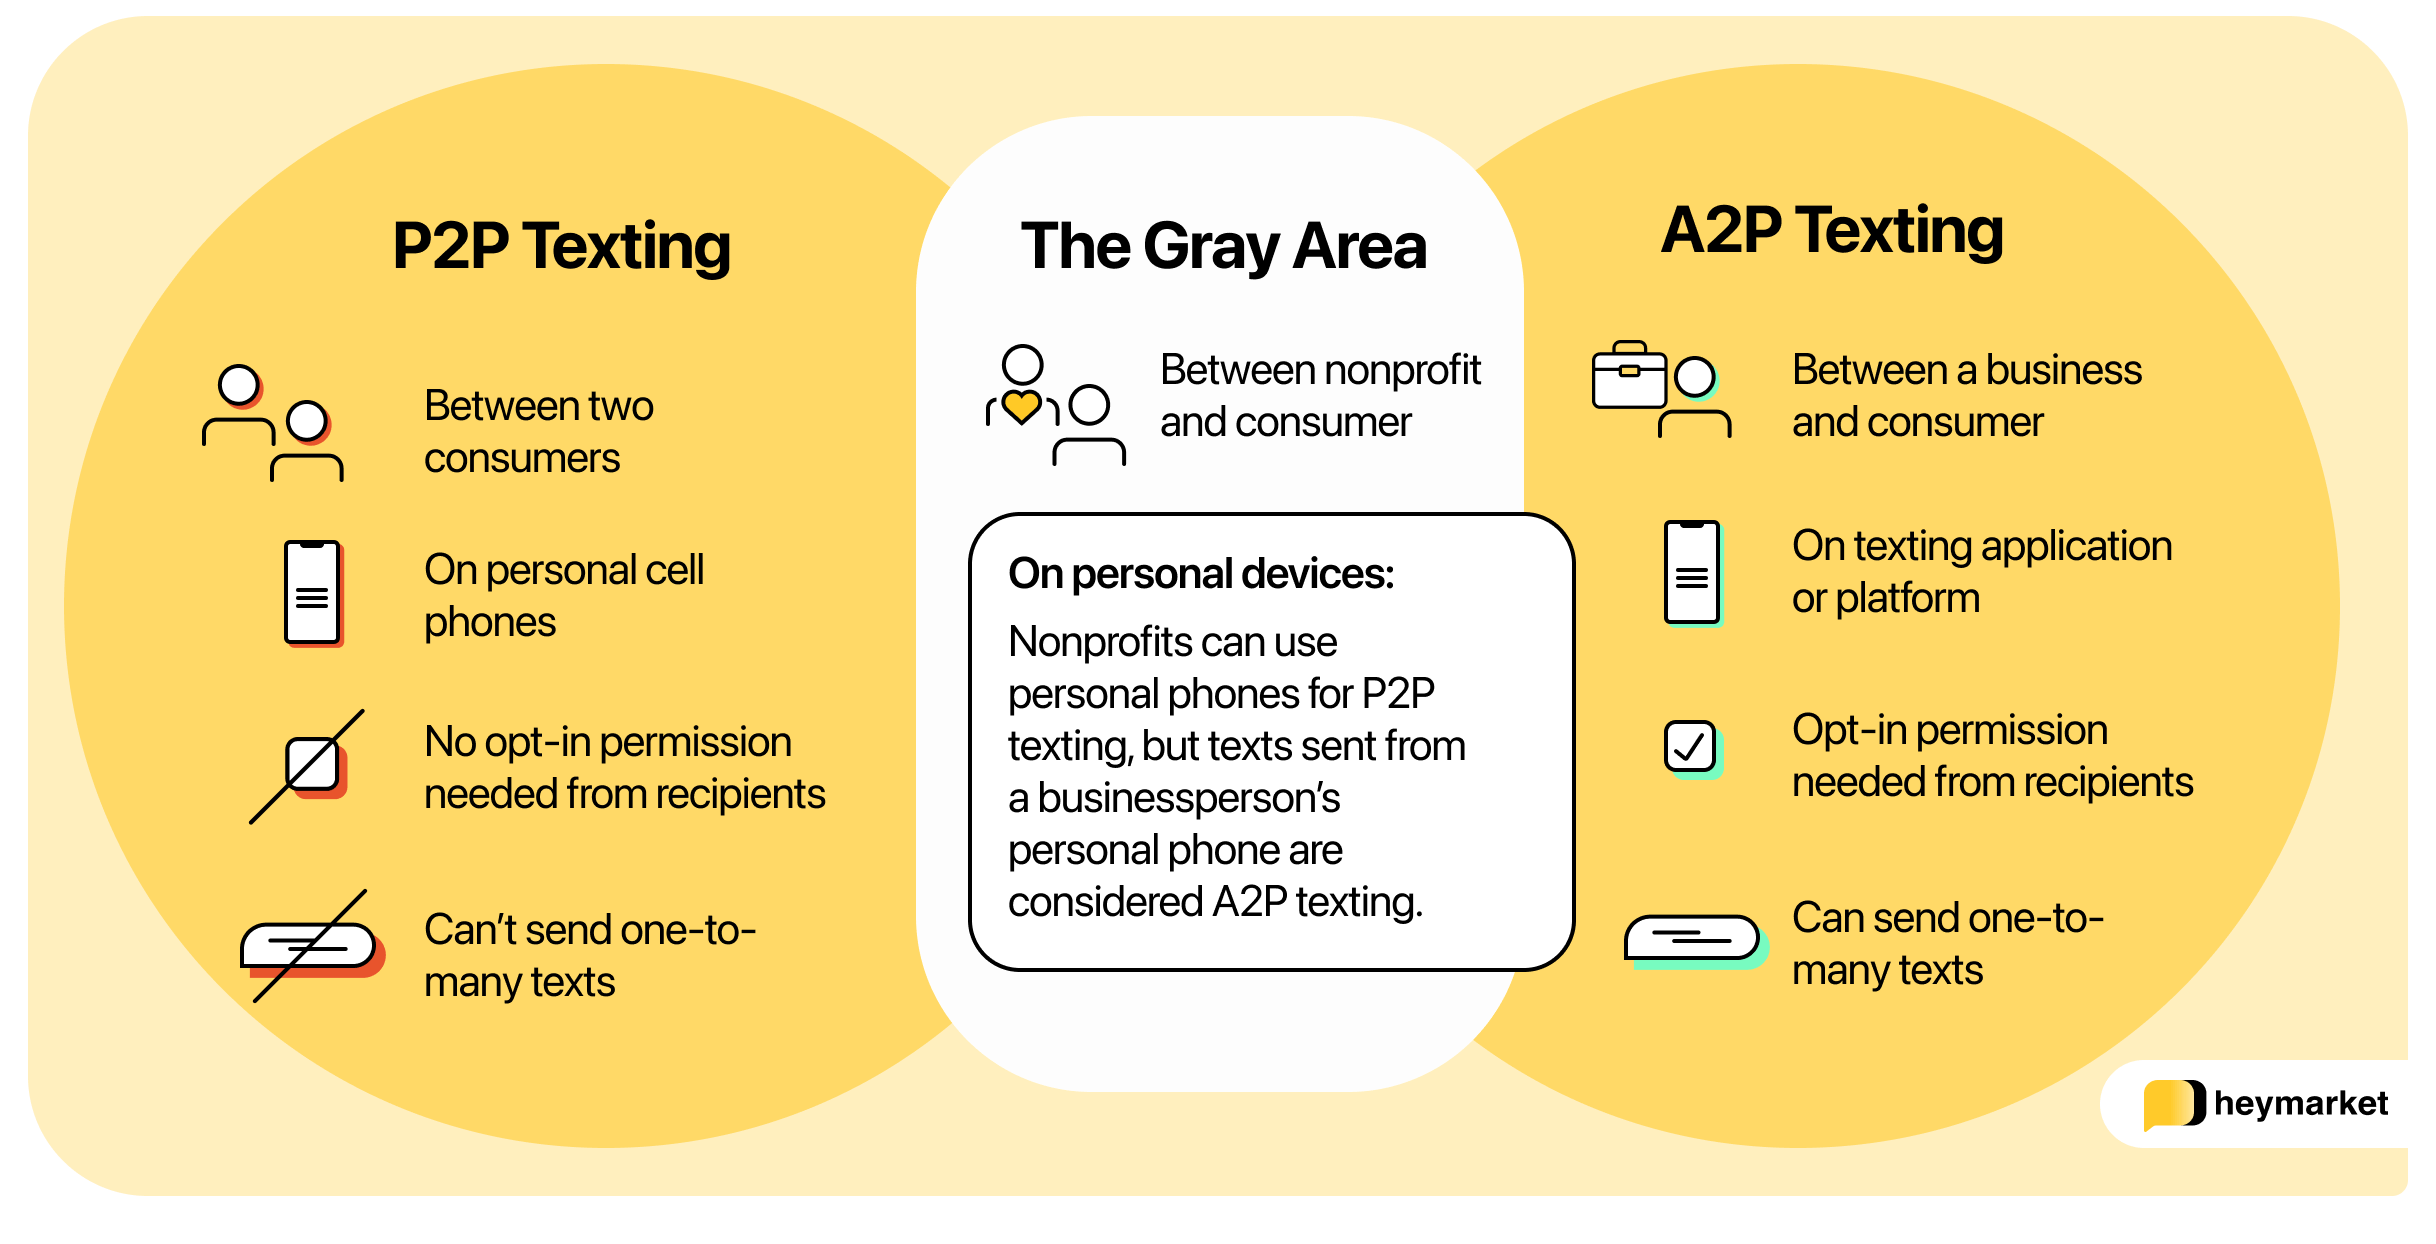 Venn diagram comparing P2P messaging to A2P messaging